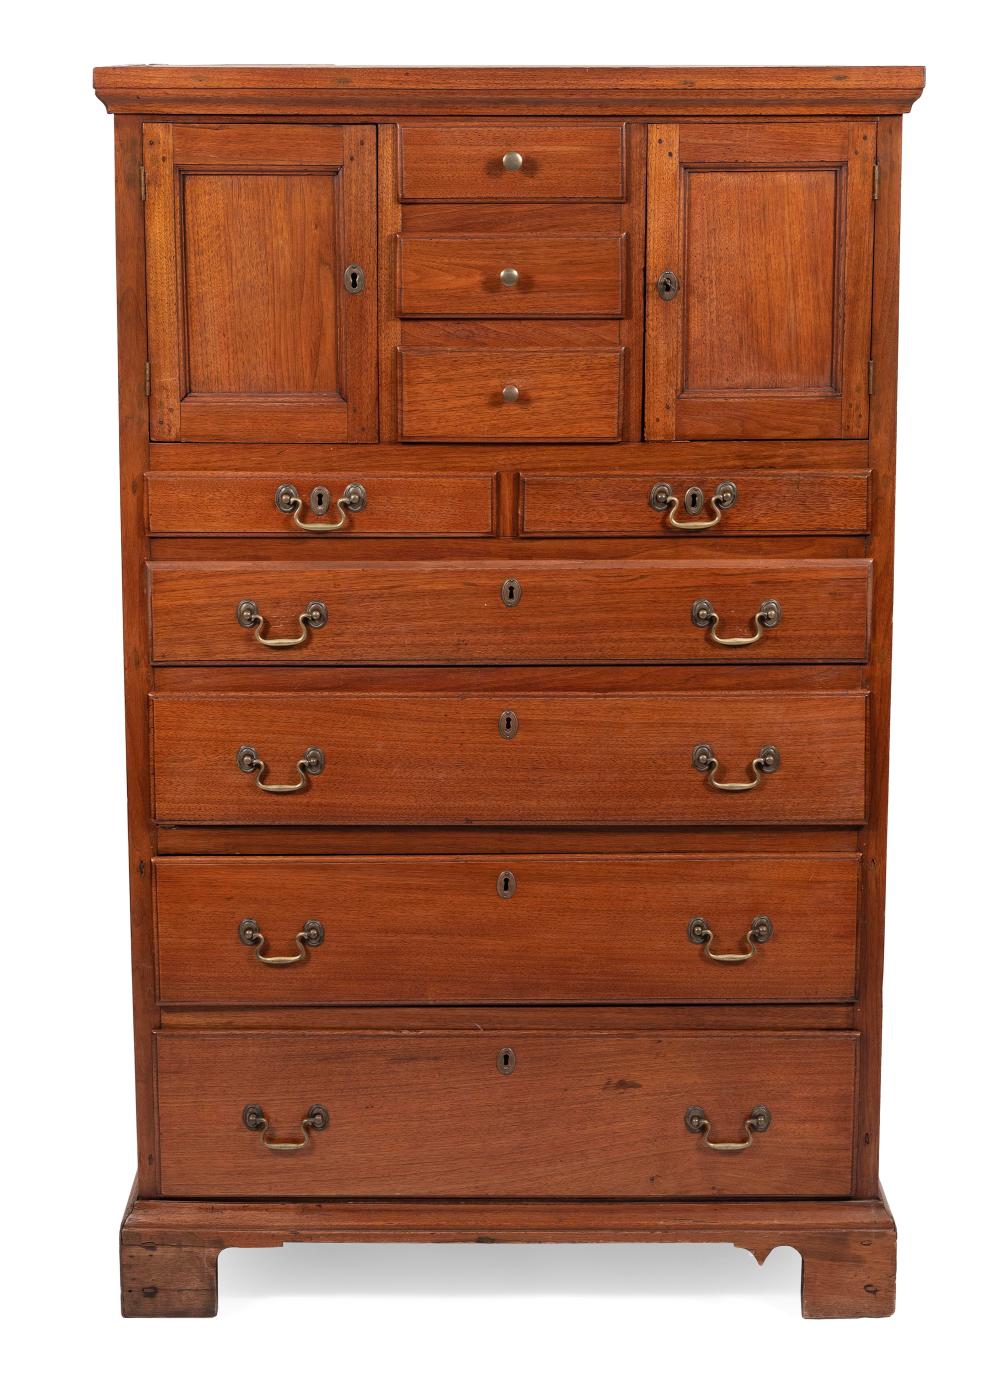 TALL CHEST AMERICA LATE 18TH OR 2f1778